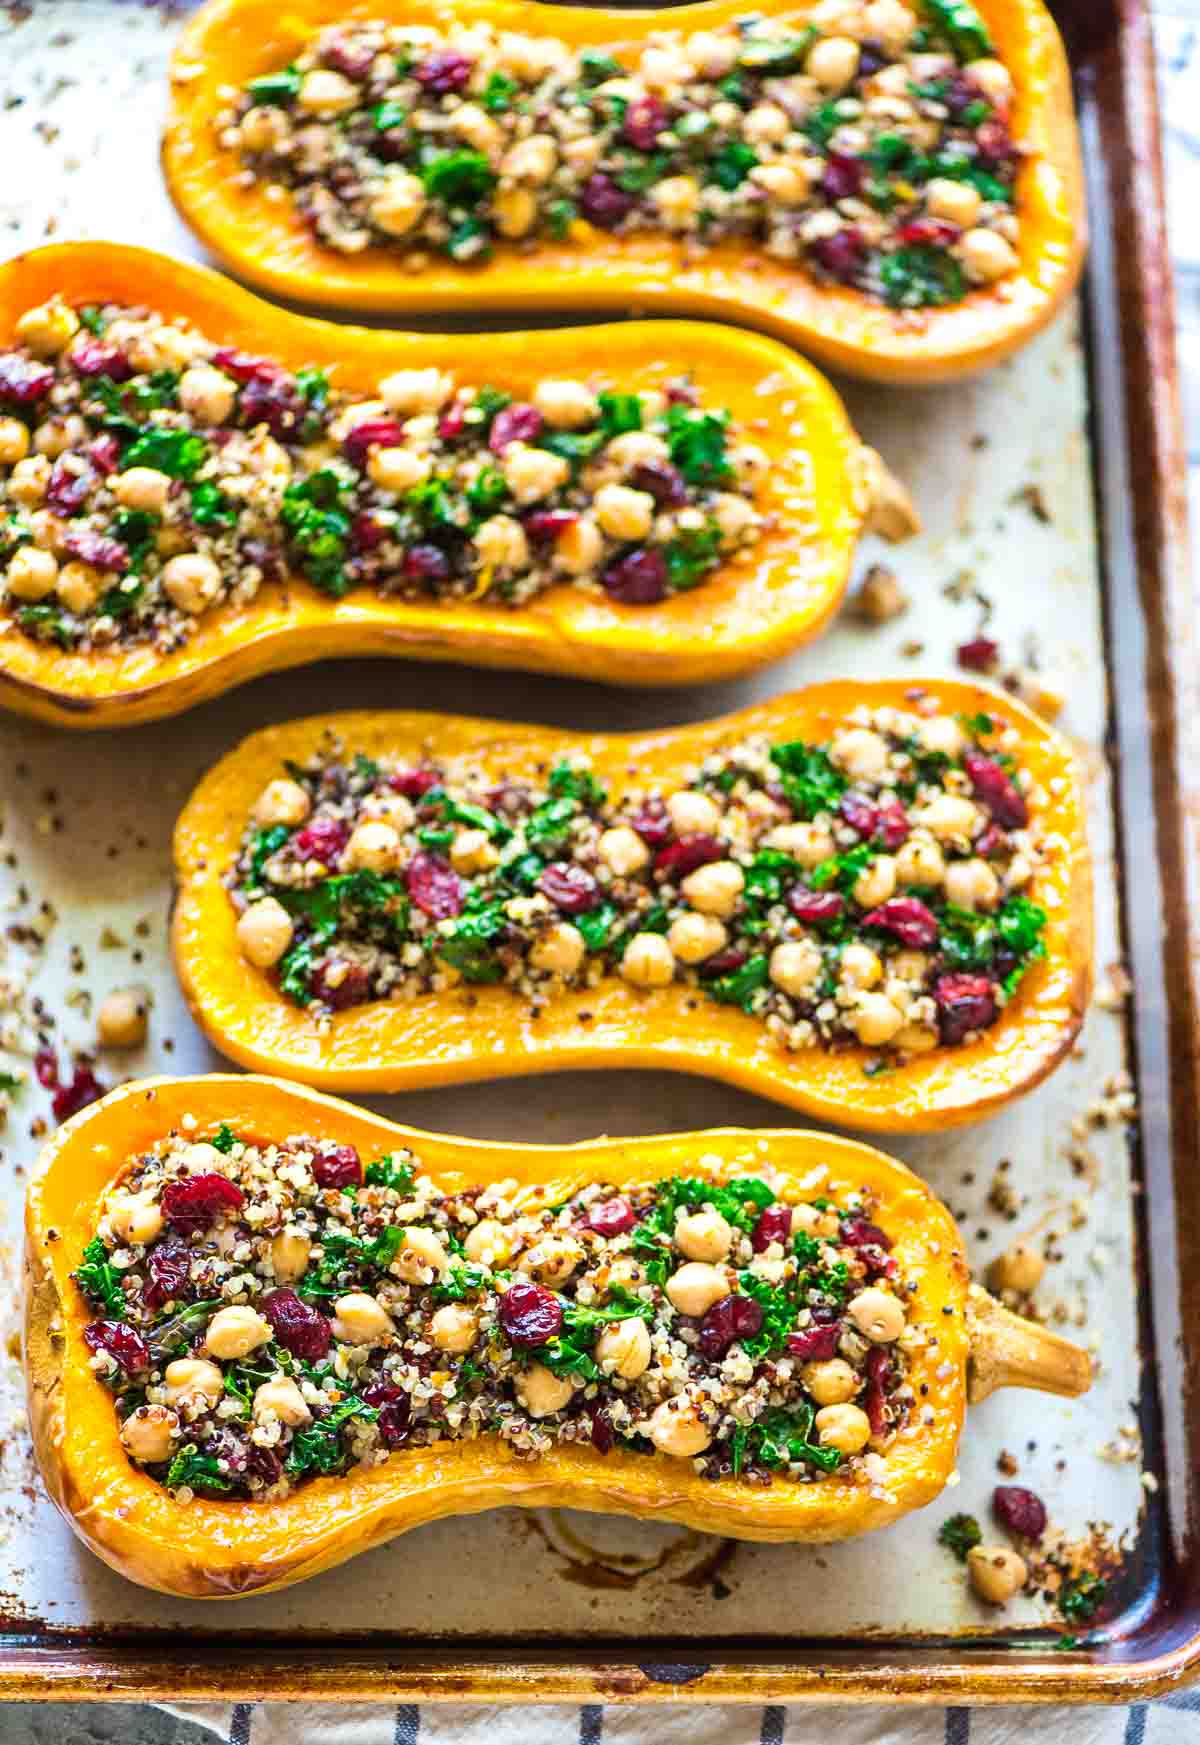 Stuffed Butternut Squash with Quinoa, Kale, Cranberries, and Chickpeas ...